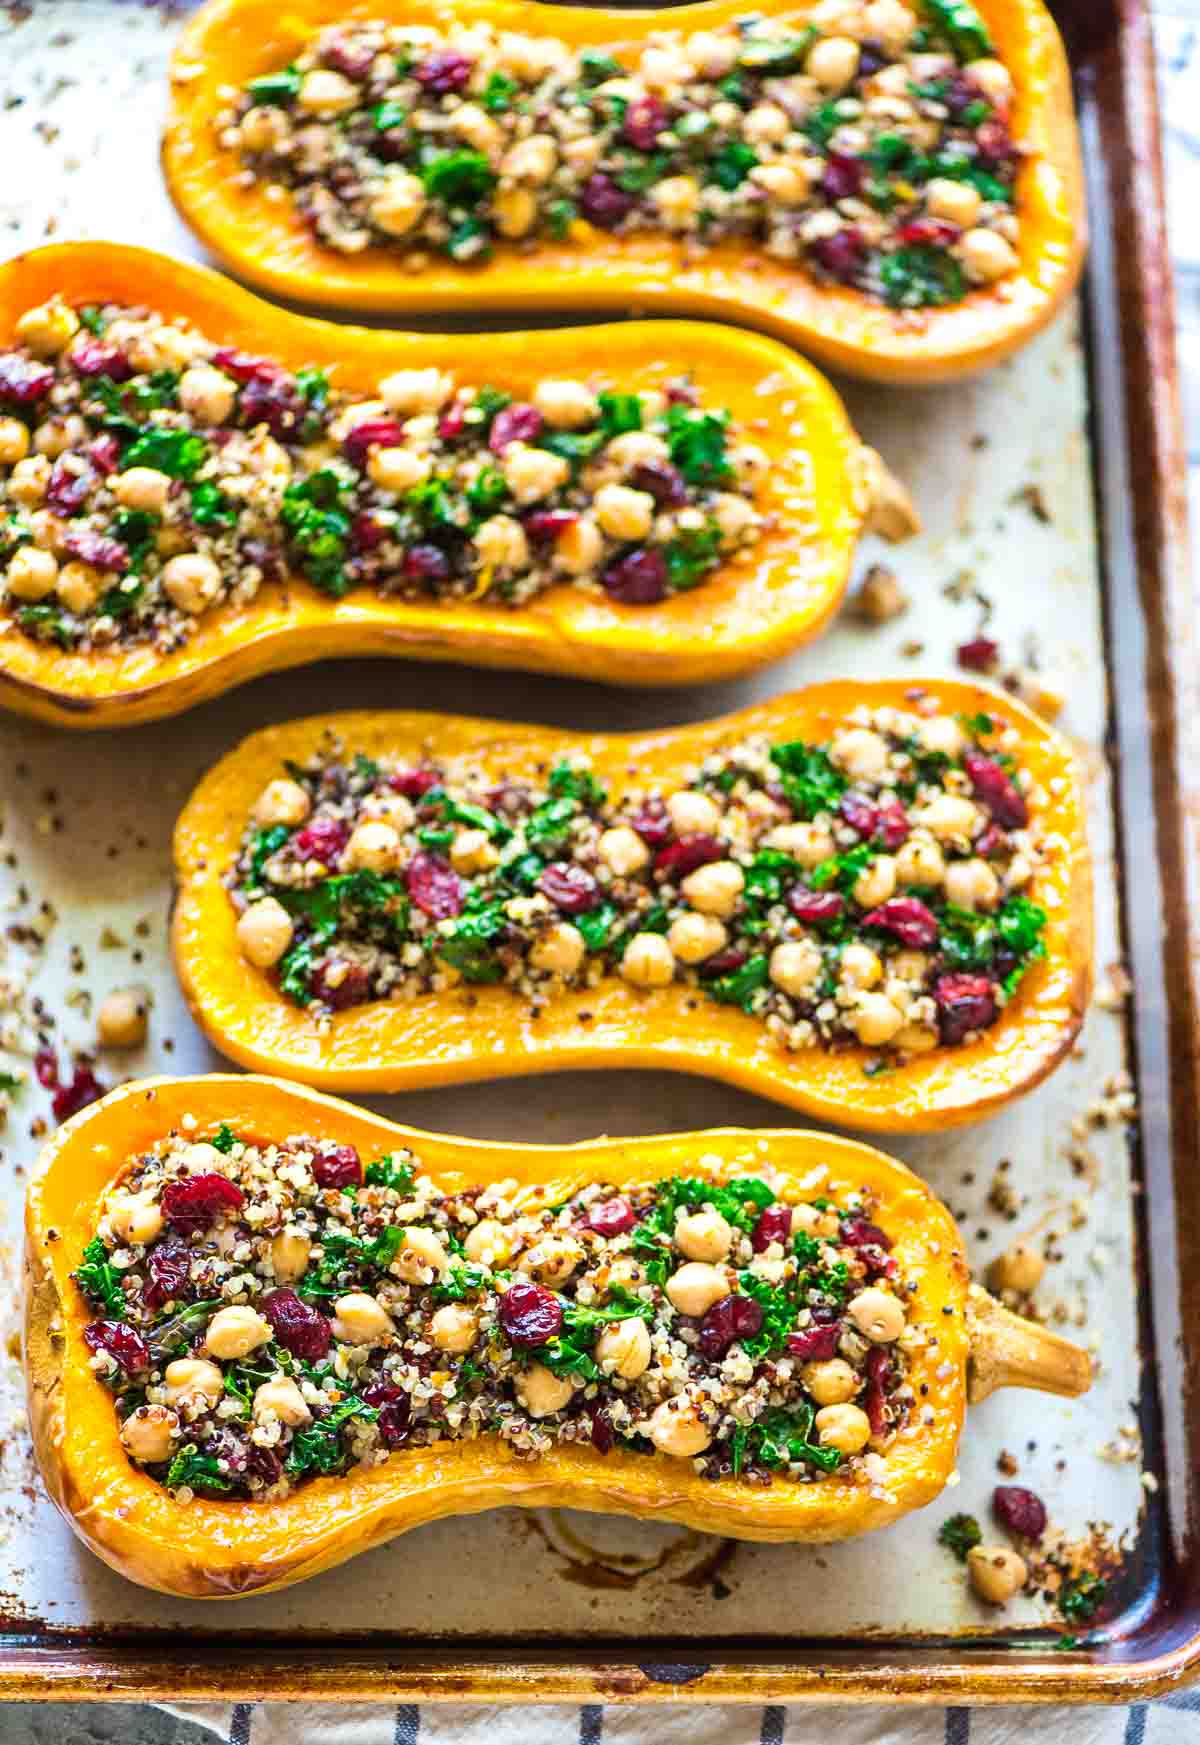 Stuffed Butternut Squash with Quinoa, Kale, Cranberries, and Chickpeas ...